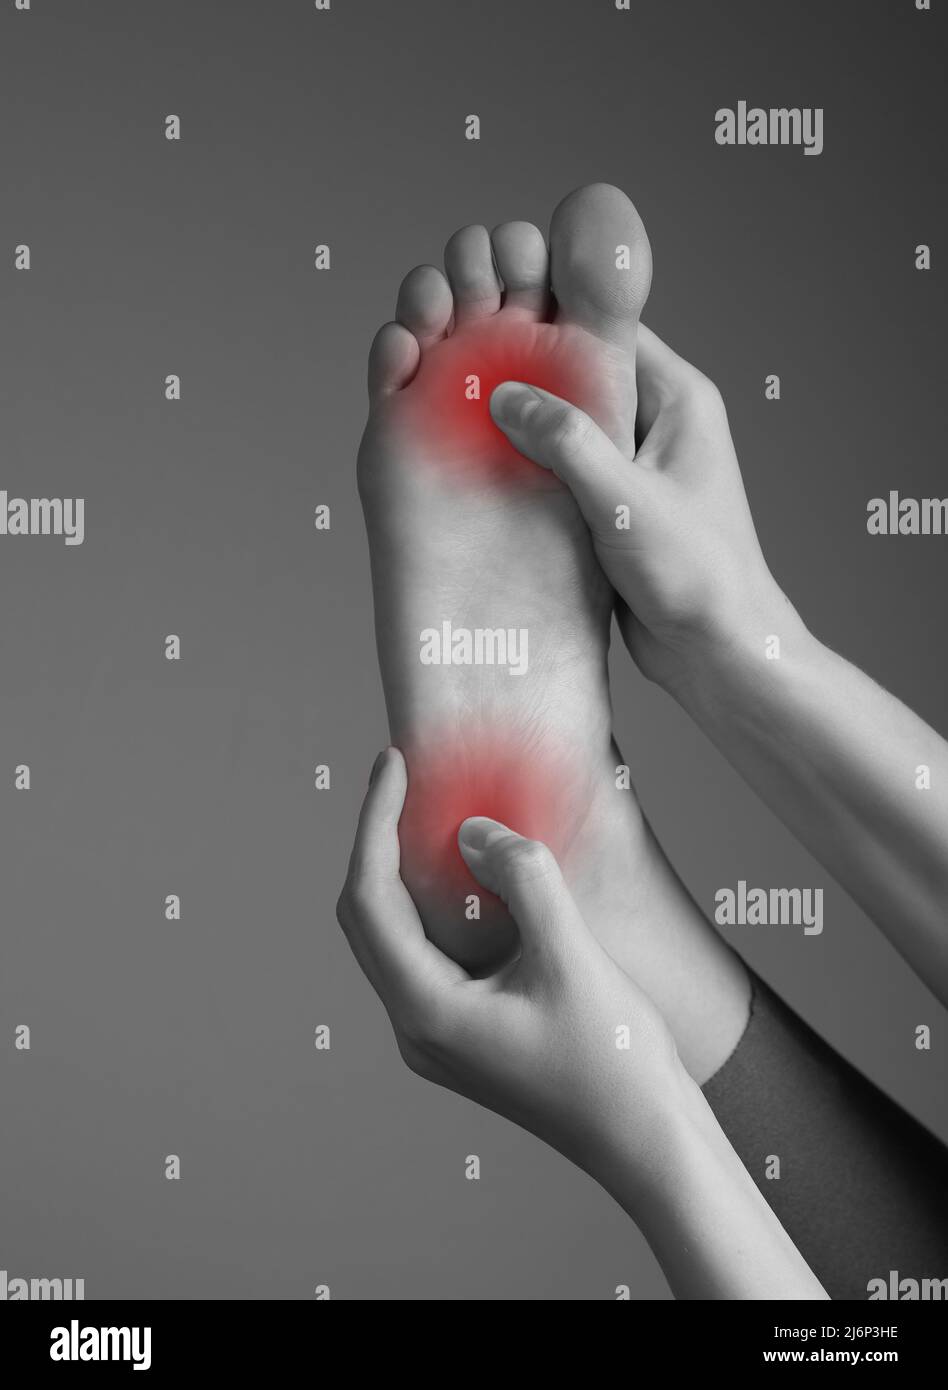 Toe and heel pain caused by plantar fasciitis, arthritis, diabetes, tendinitis, spurs, bruise, fracture. Woman hands holding foot with red spot. Black and white. High quality photo Stock Photo